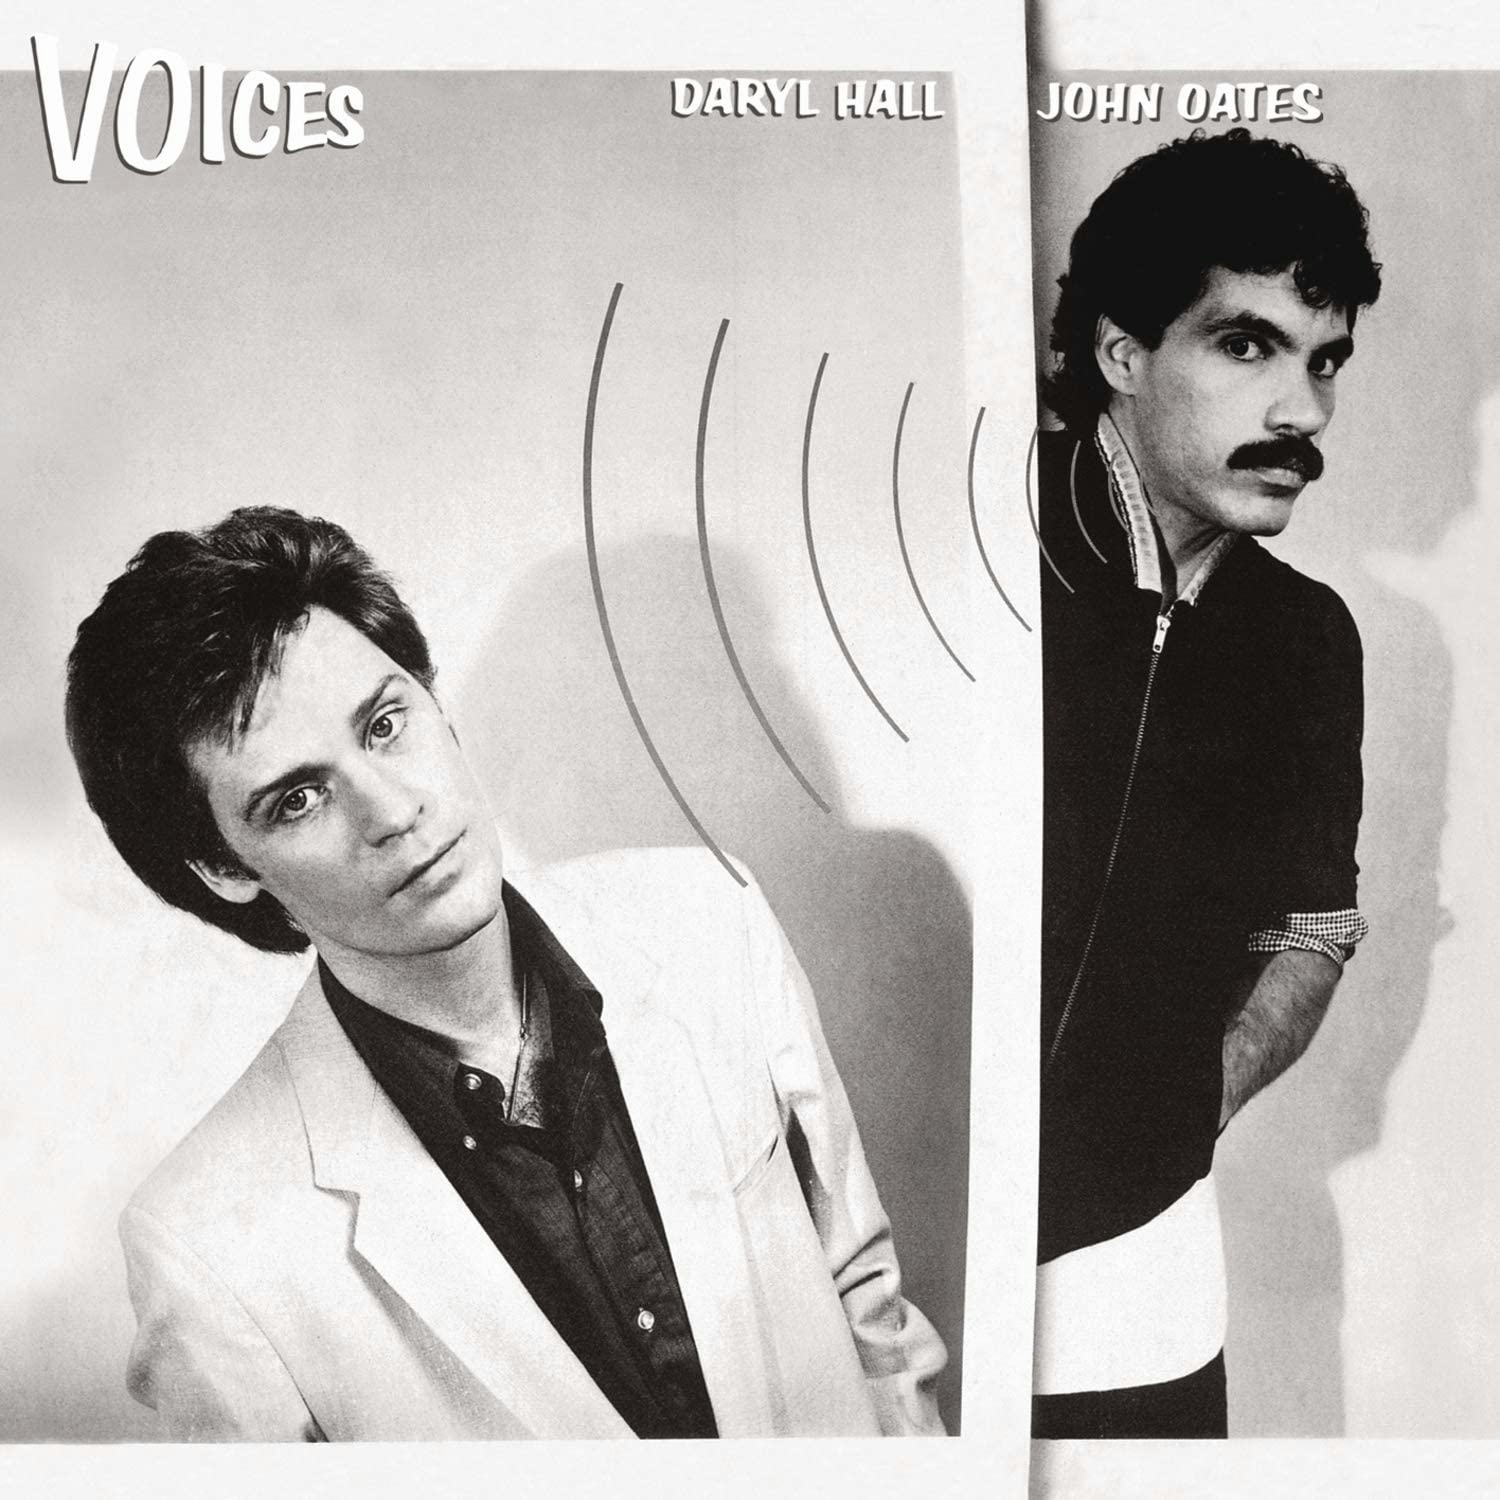 Album artwork for Voices by Hall and Oates